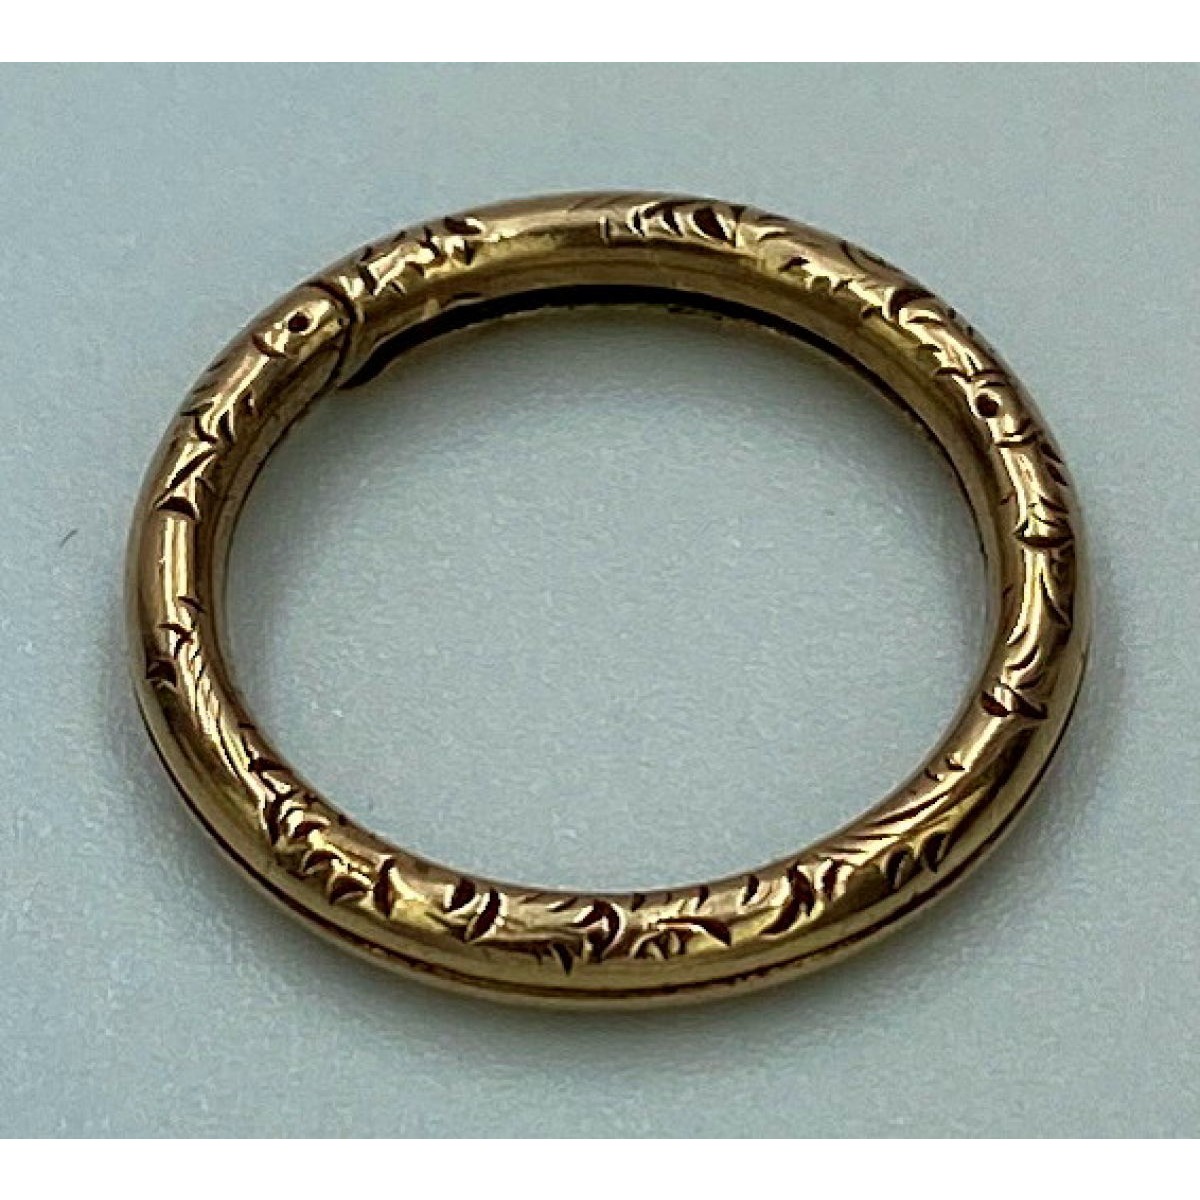 Unusual Antique English Engraved Gold Split Ring - Fun, Something Different